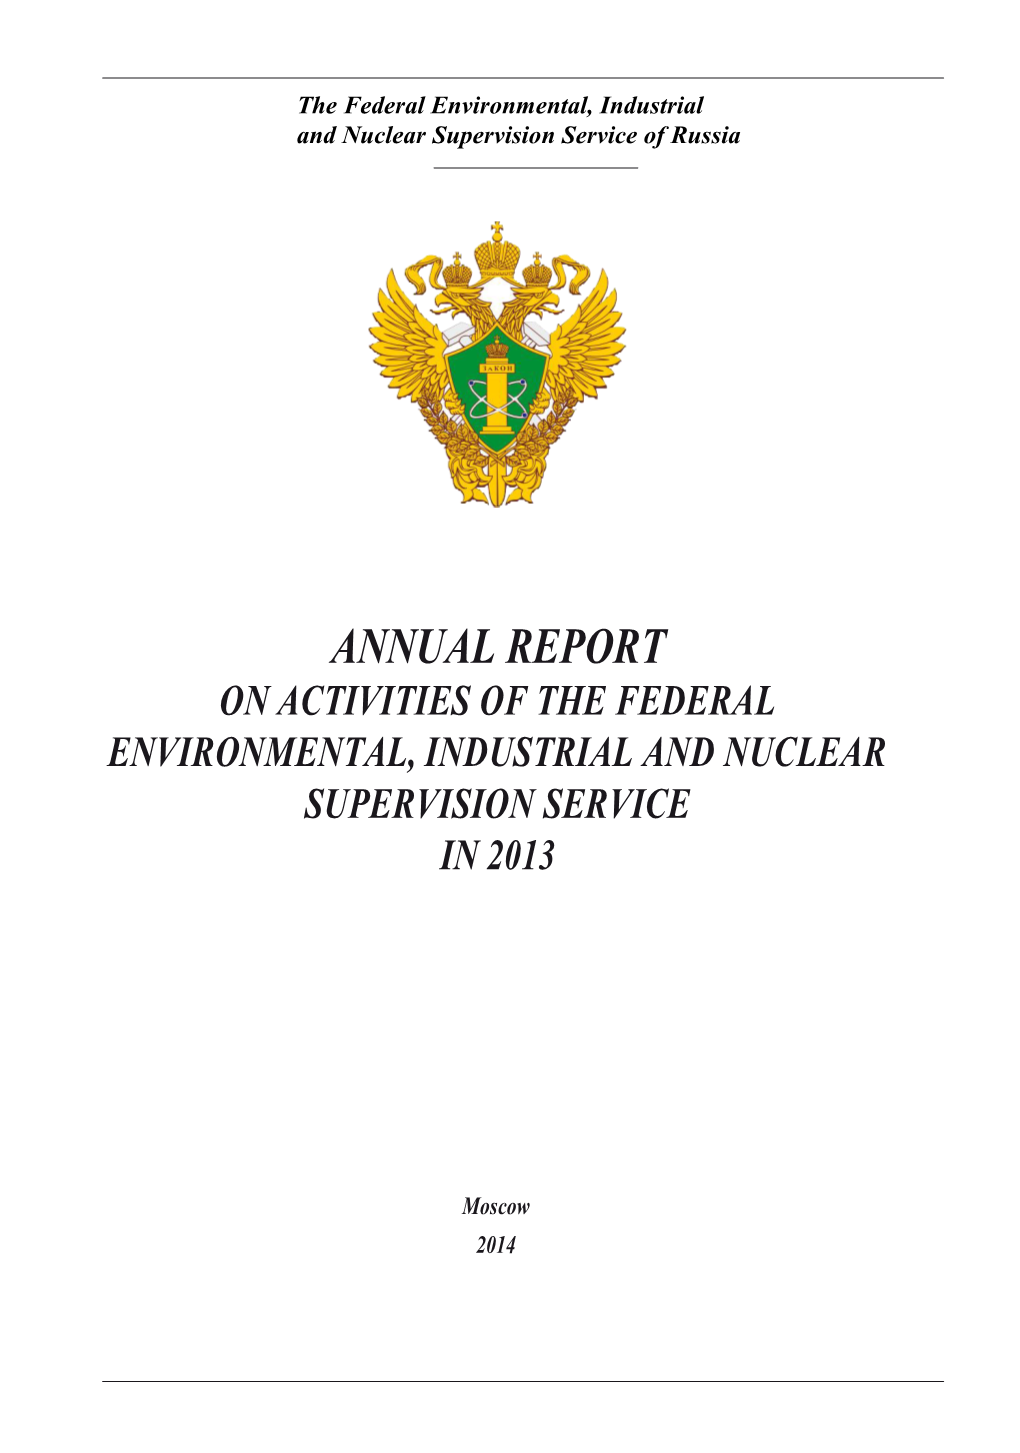 Report on Activities of the Federal Environmental, Industrial and Nuclear Supervision Service of Russia in 2013